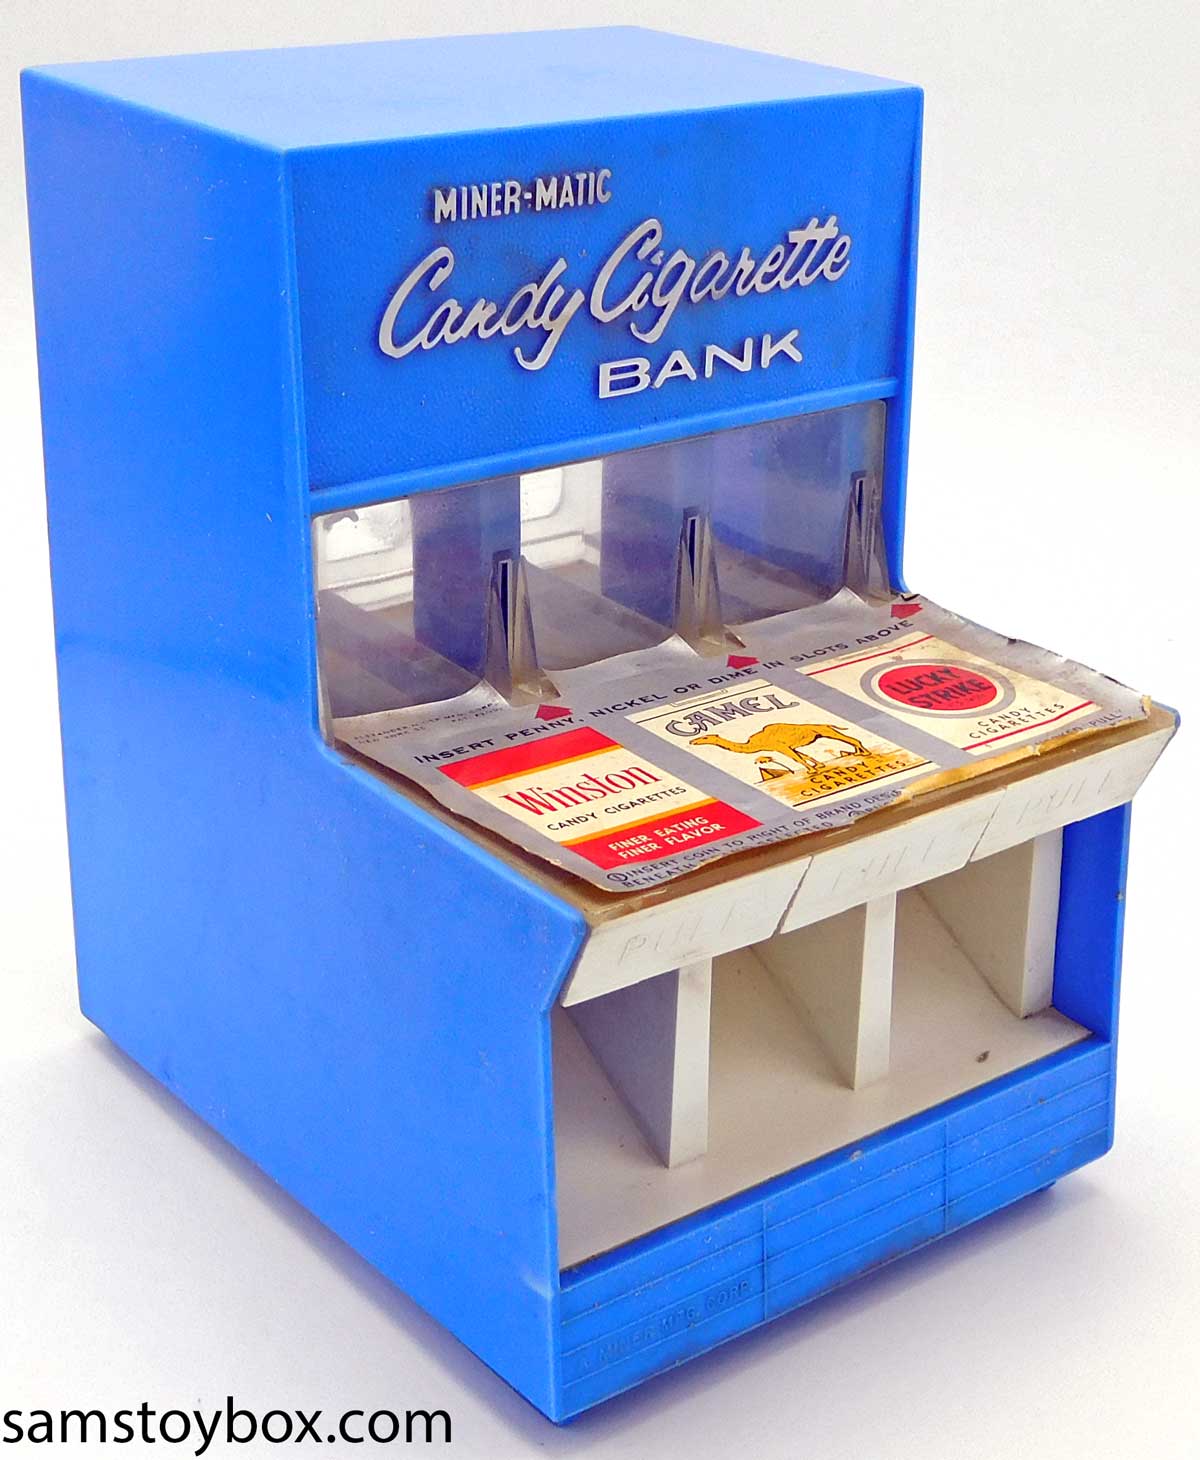 Miner-Matic Candy Cigarette Bank Box in Blue